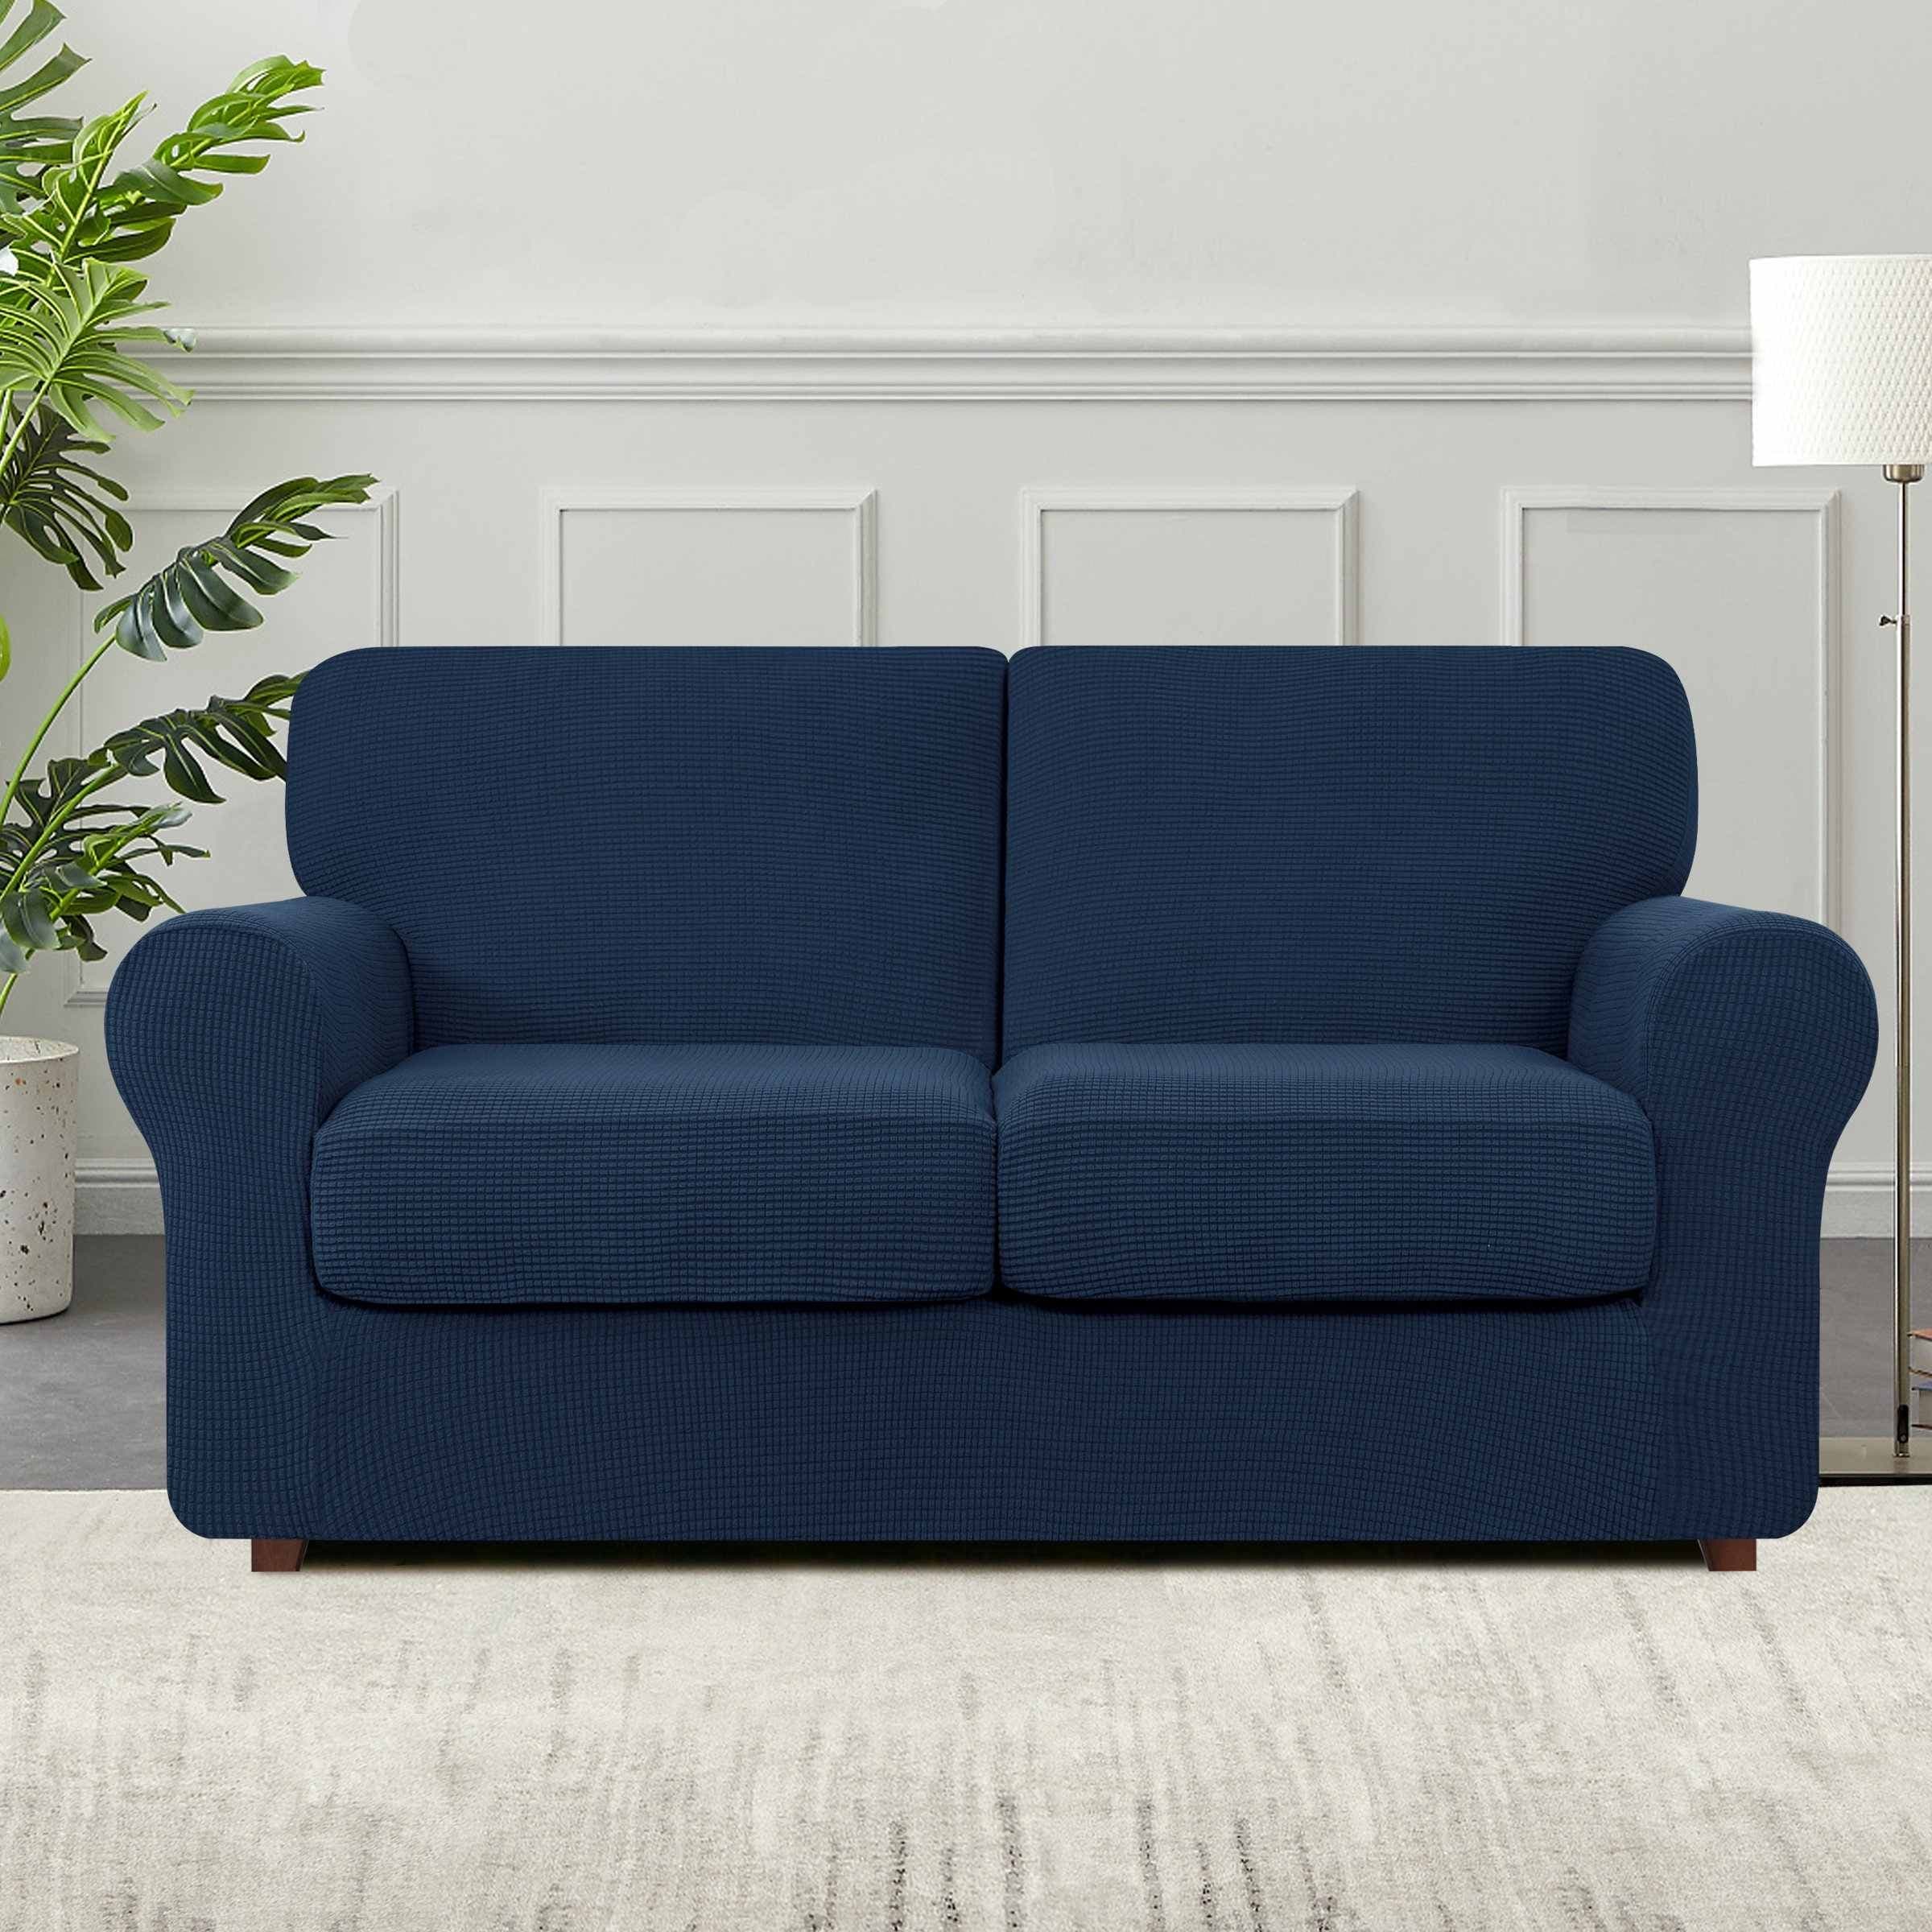 https://ak1.ostkcdn.com/images/products/is/images/direct/465b7864816d3296c4eba7353c1701120f23b361/Subrtex-9-Piece-Stretch-Sofa-Slipcover-Sets-with-4-Backrest-Cushion-Covers-and-4-Seat-Cushion-Covers.jpg